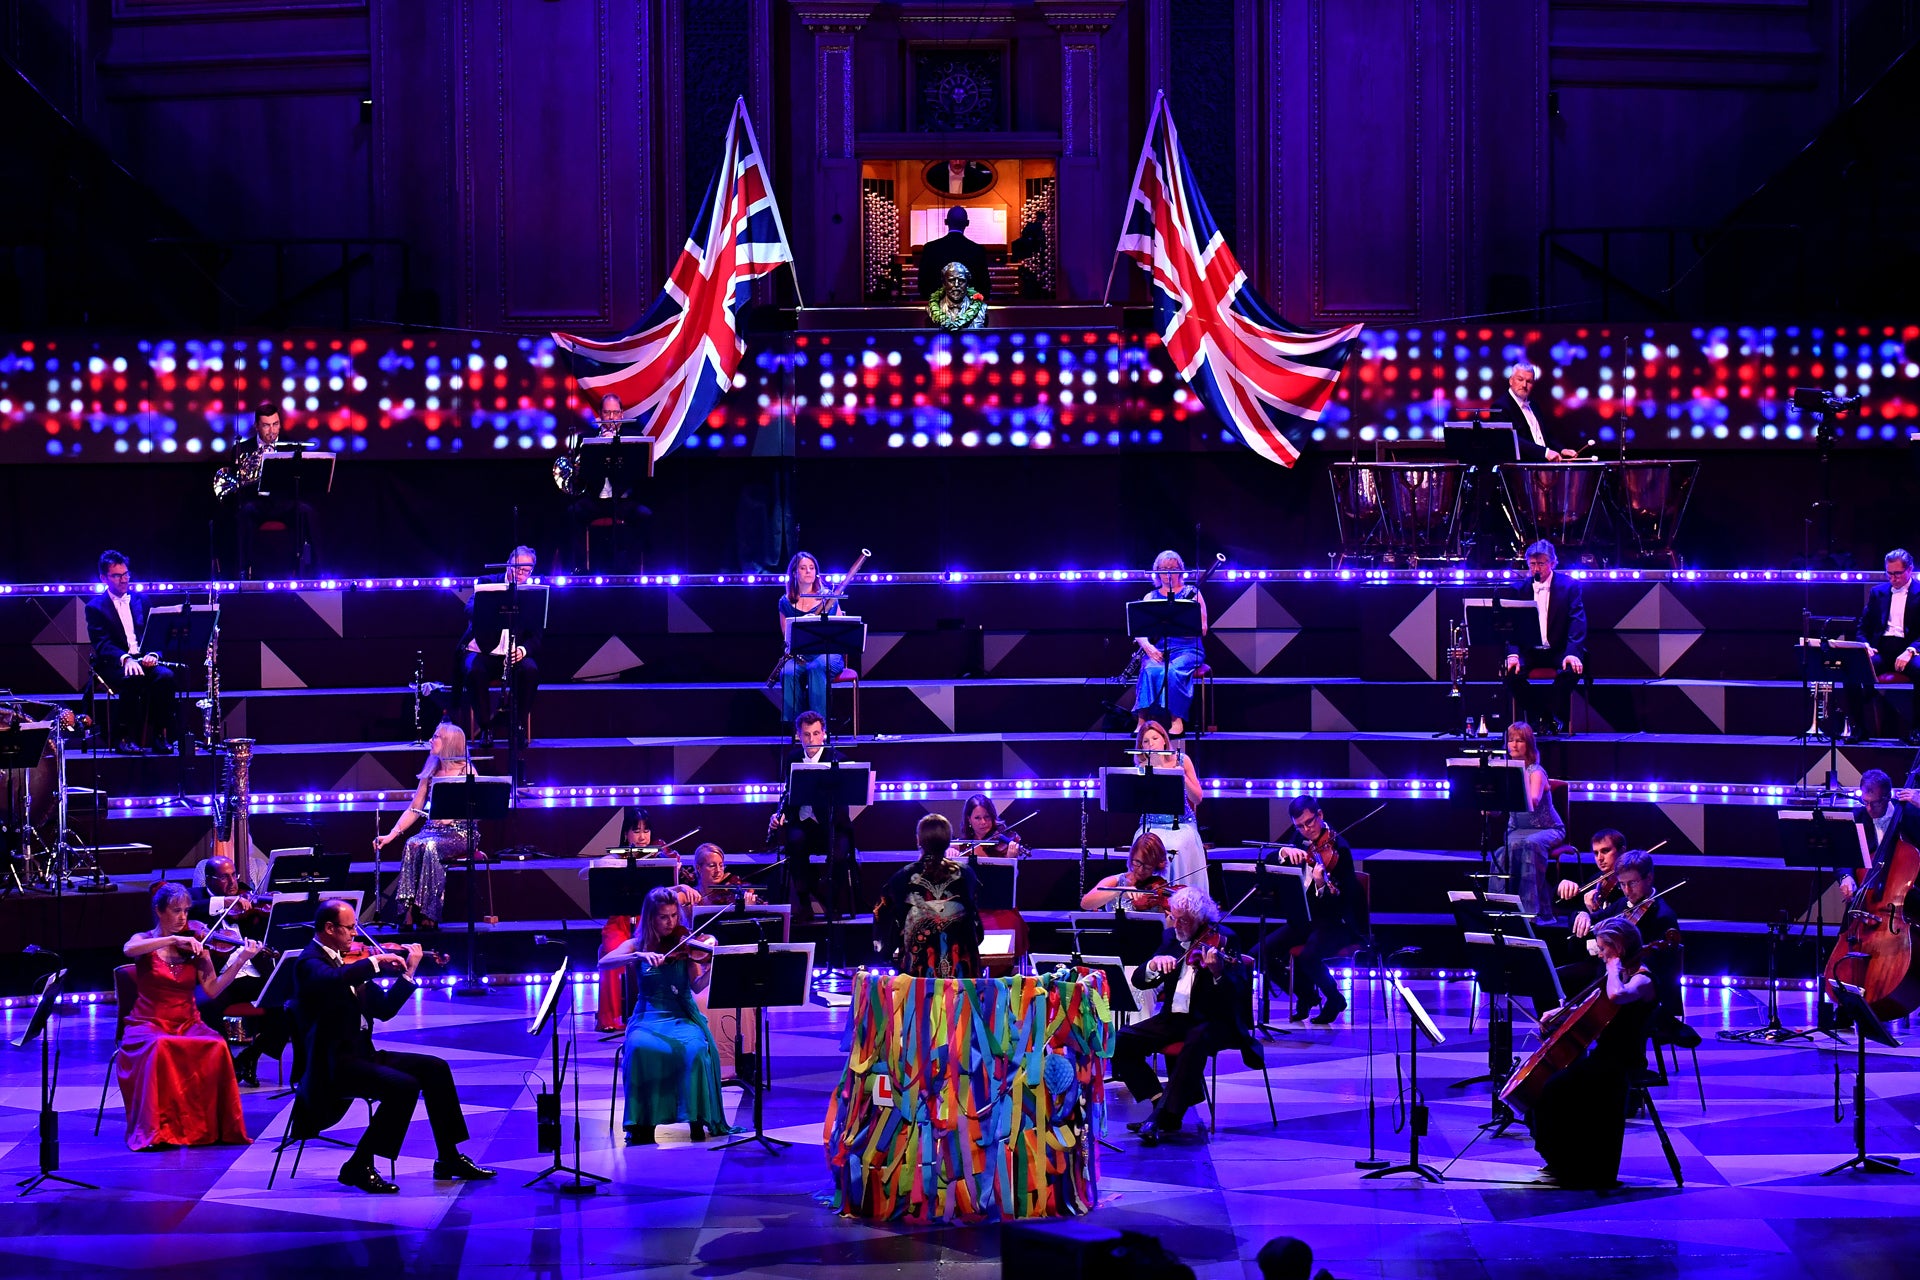 Last Night of the Proms conductor Dalia Stasevska with a reduced orchestra which performed live at the Royal Albert Hall but without an audience due to coronavirus restrictions (Chris Christodoulou/BBC)